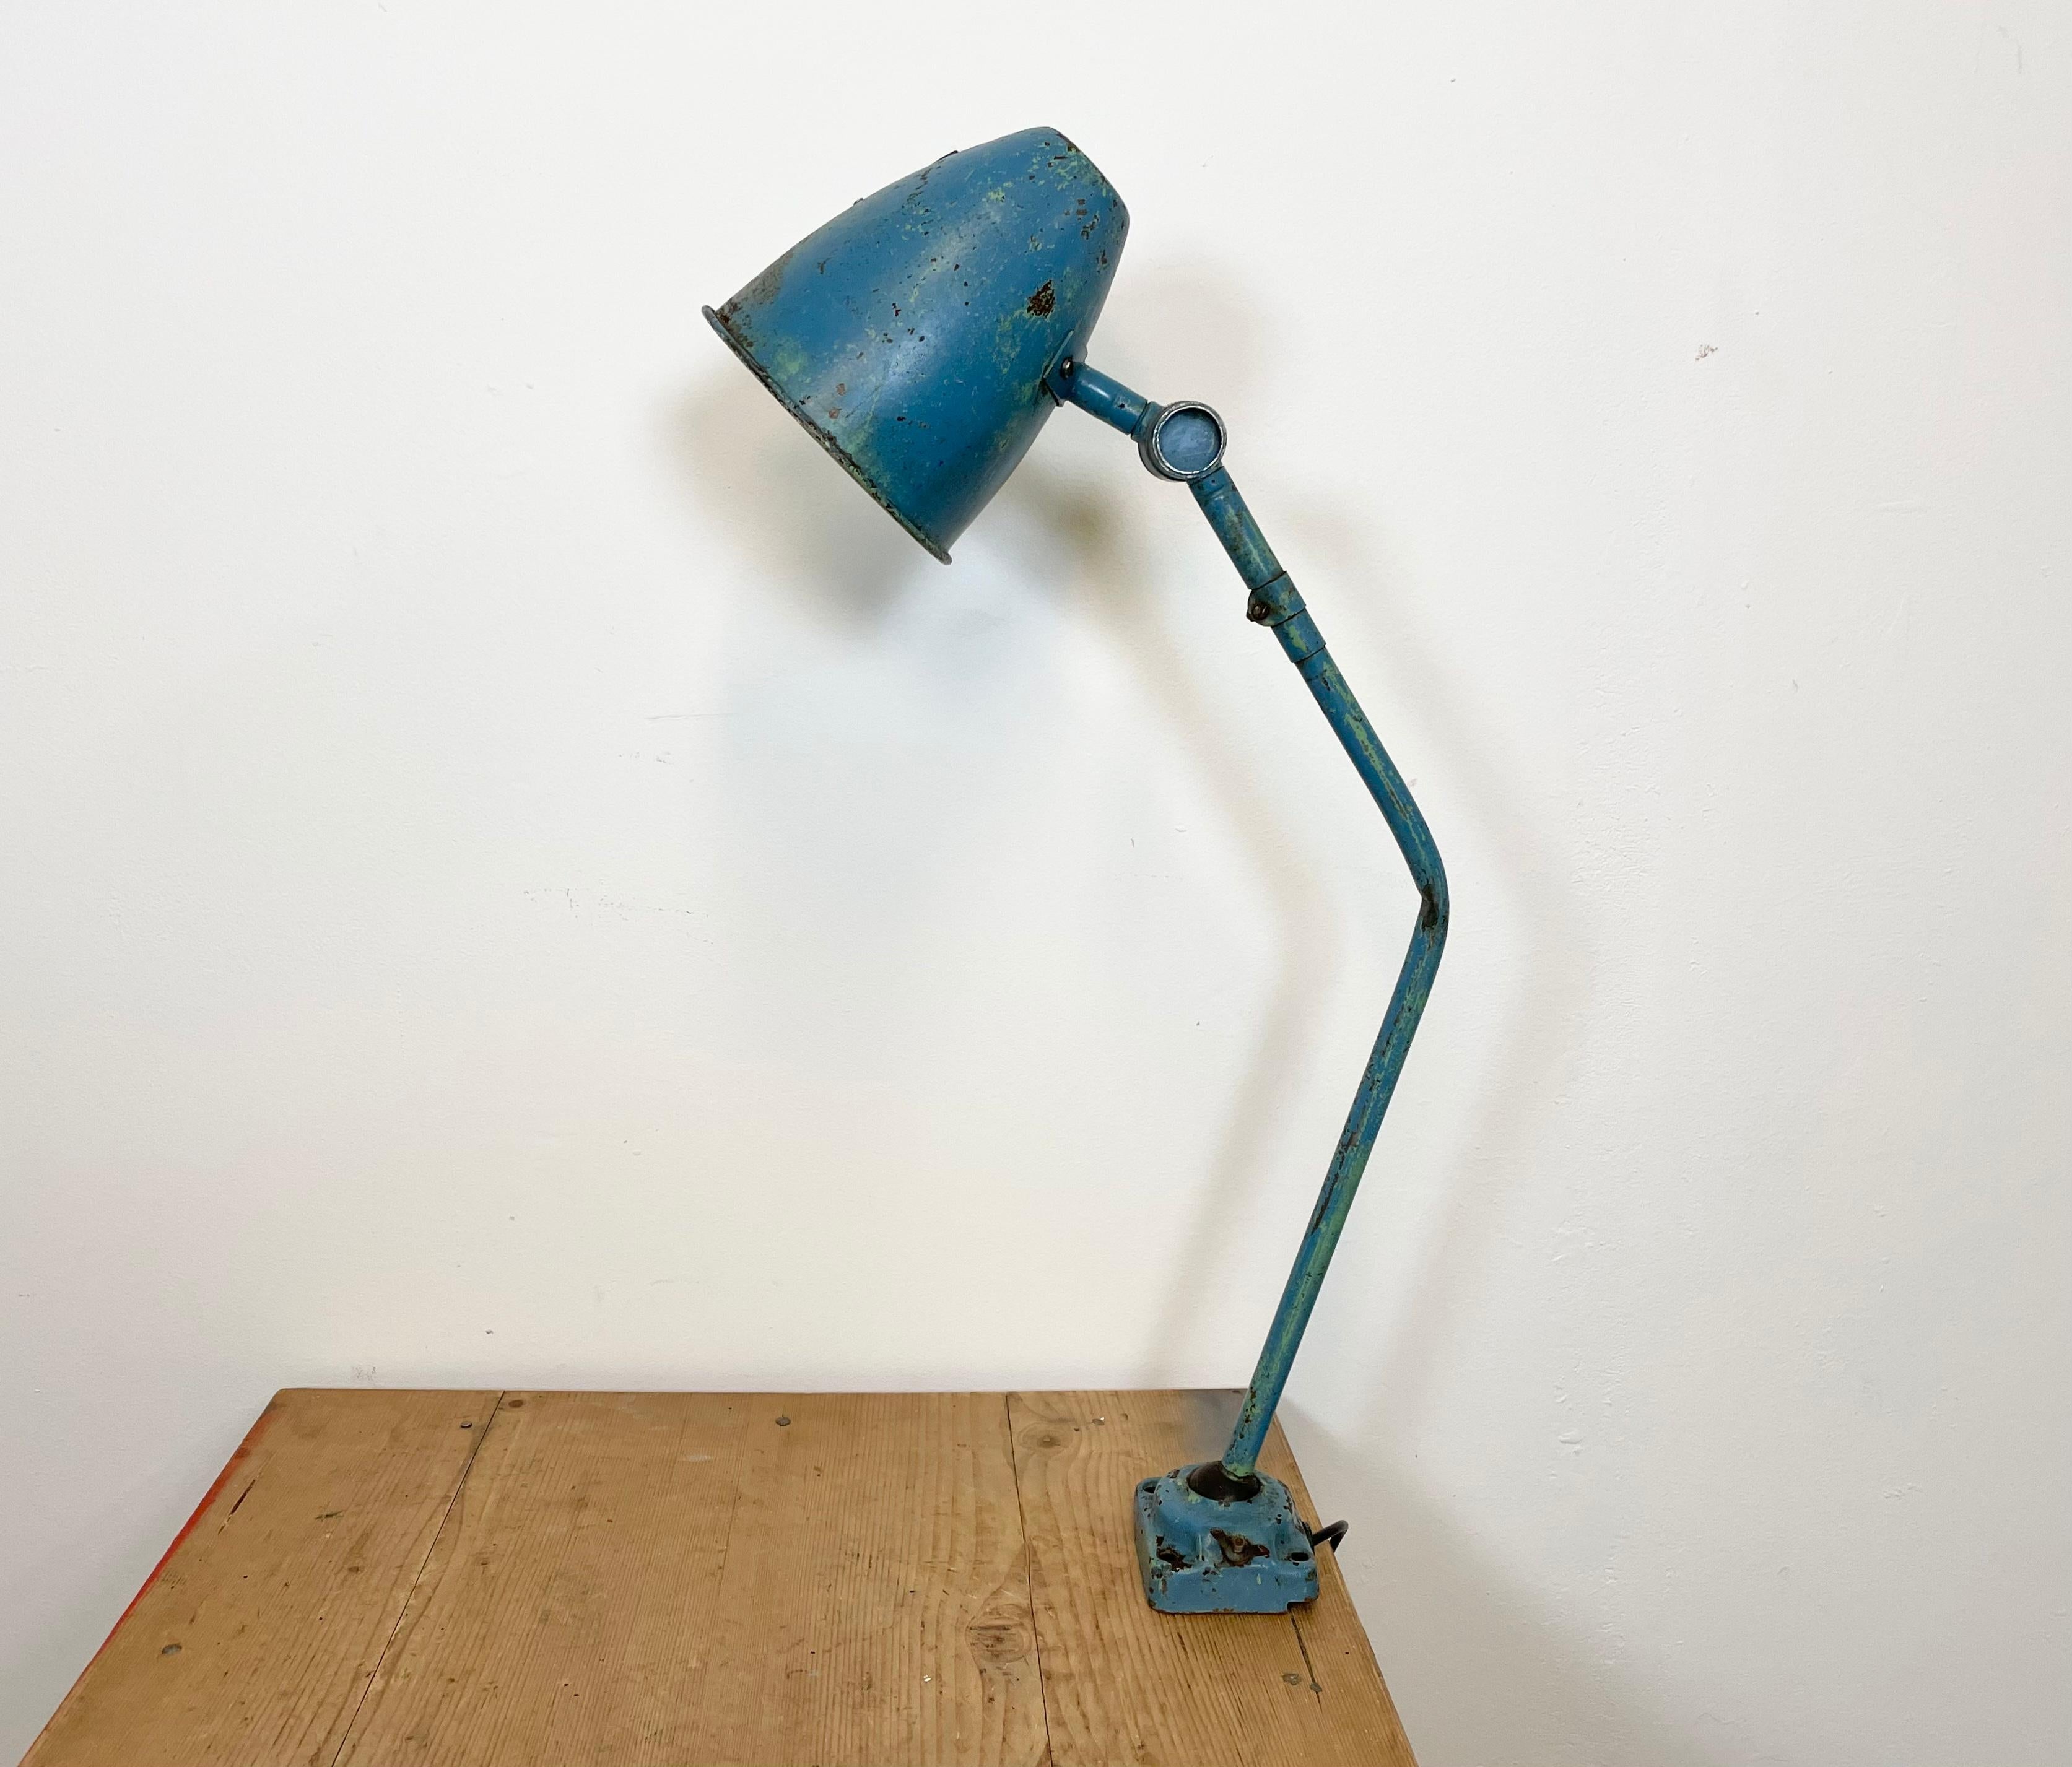 This blue industrial style iron table lamp was made in former Czechoslovakia during the 1960s. It features a metal shade,an arm with two adjustable joints and iron base. Porcelain socket requires E 27 light bulbs . New wire. The switch is situated